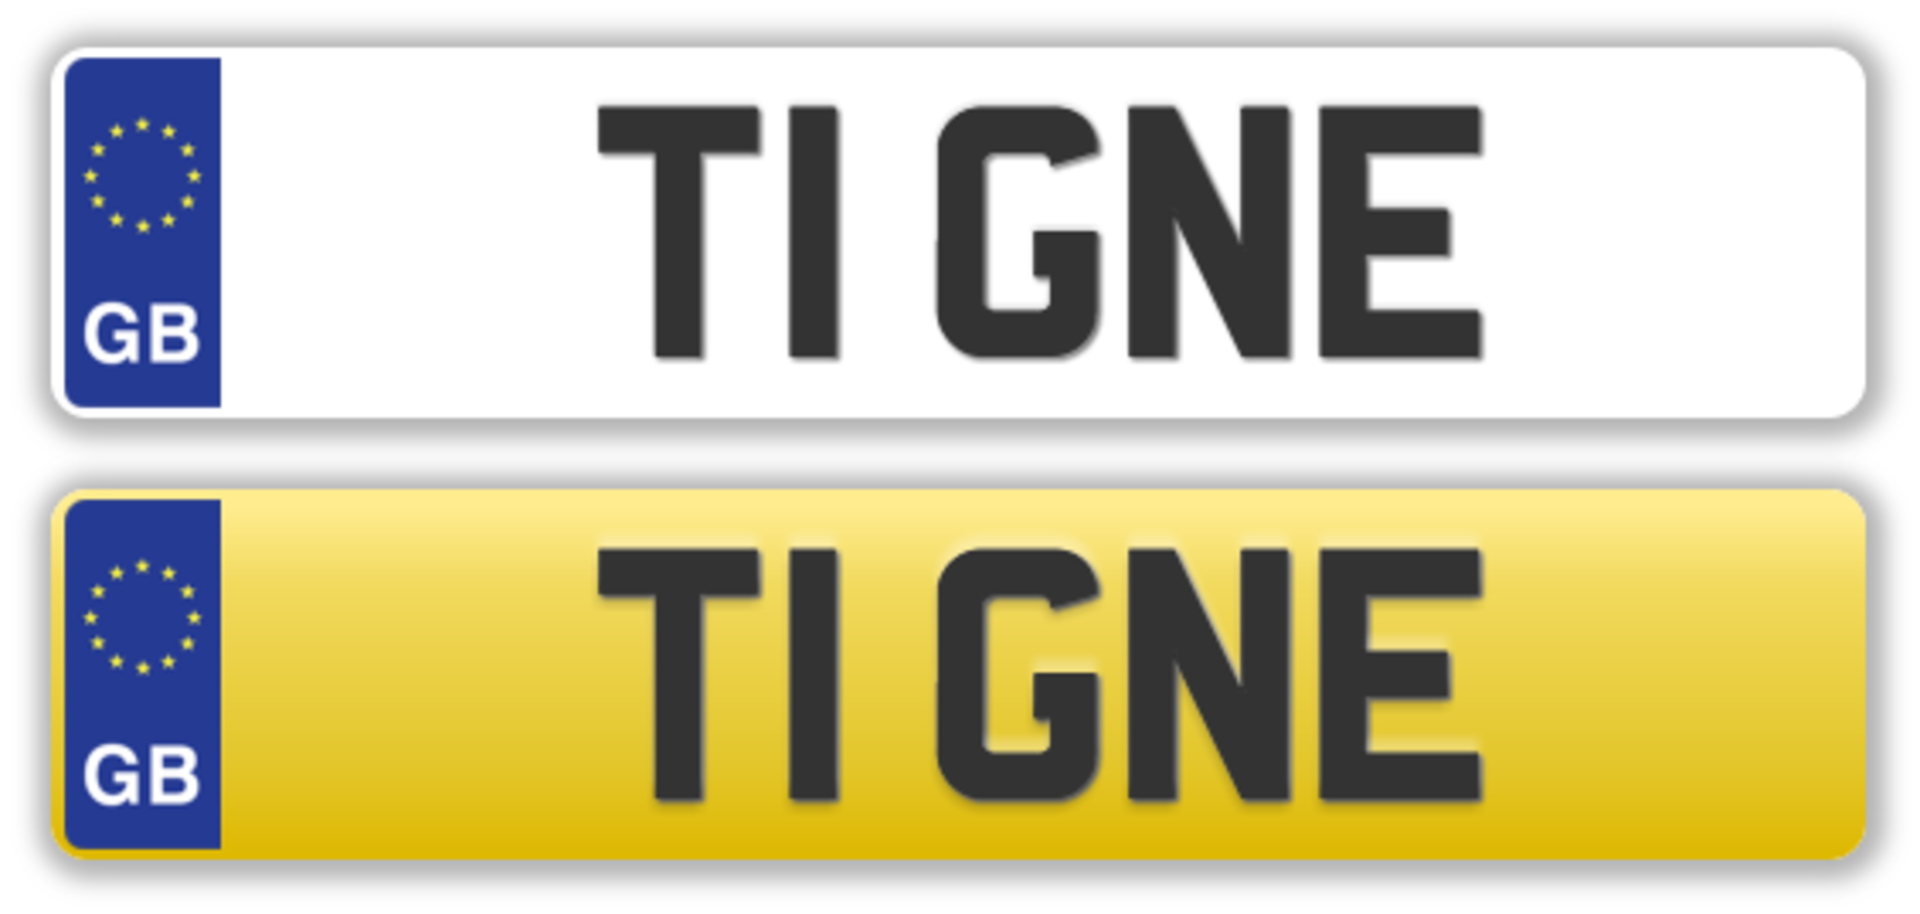 Cherished Plate - T1 GNE - No transfer fees. All registrations on retention and ready to transfer.